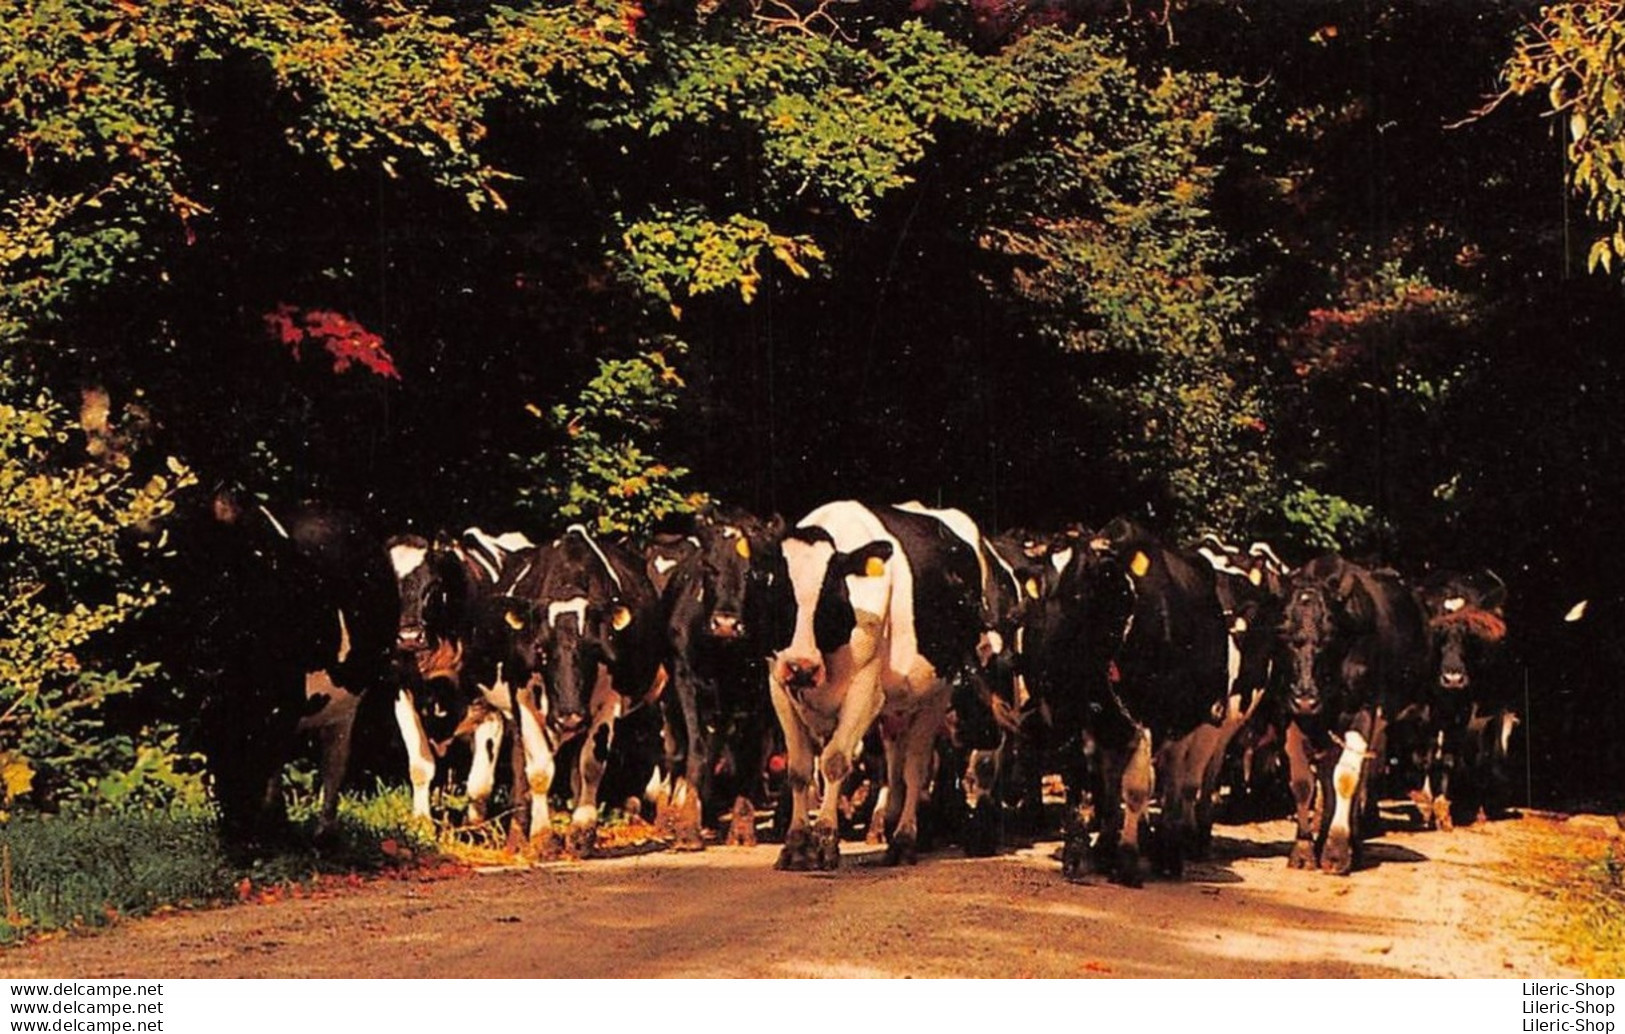 COWS HAVE THE RIGHT OF WAY IN VERMONT. THEY OUTNUMBER PEOPLE IN SOME PARTS OF THE STATE !  - Cows